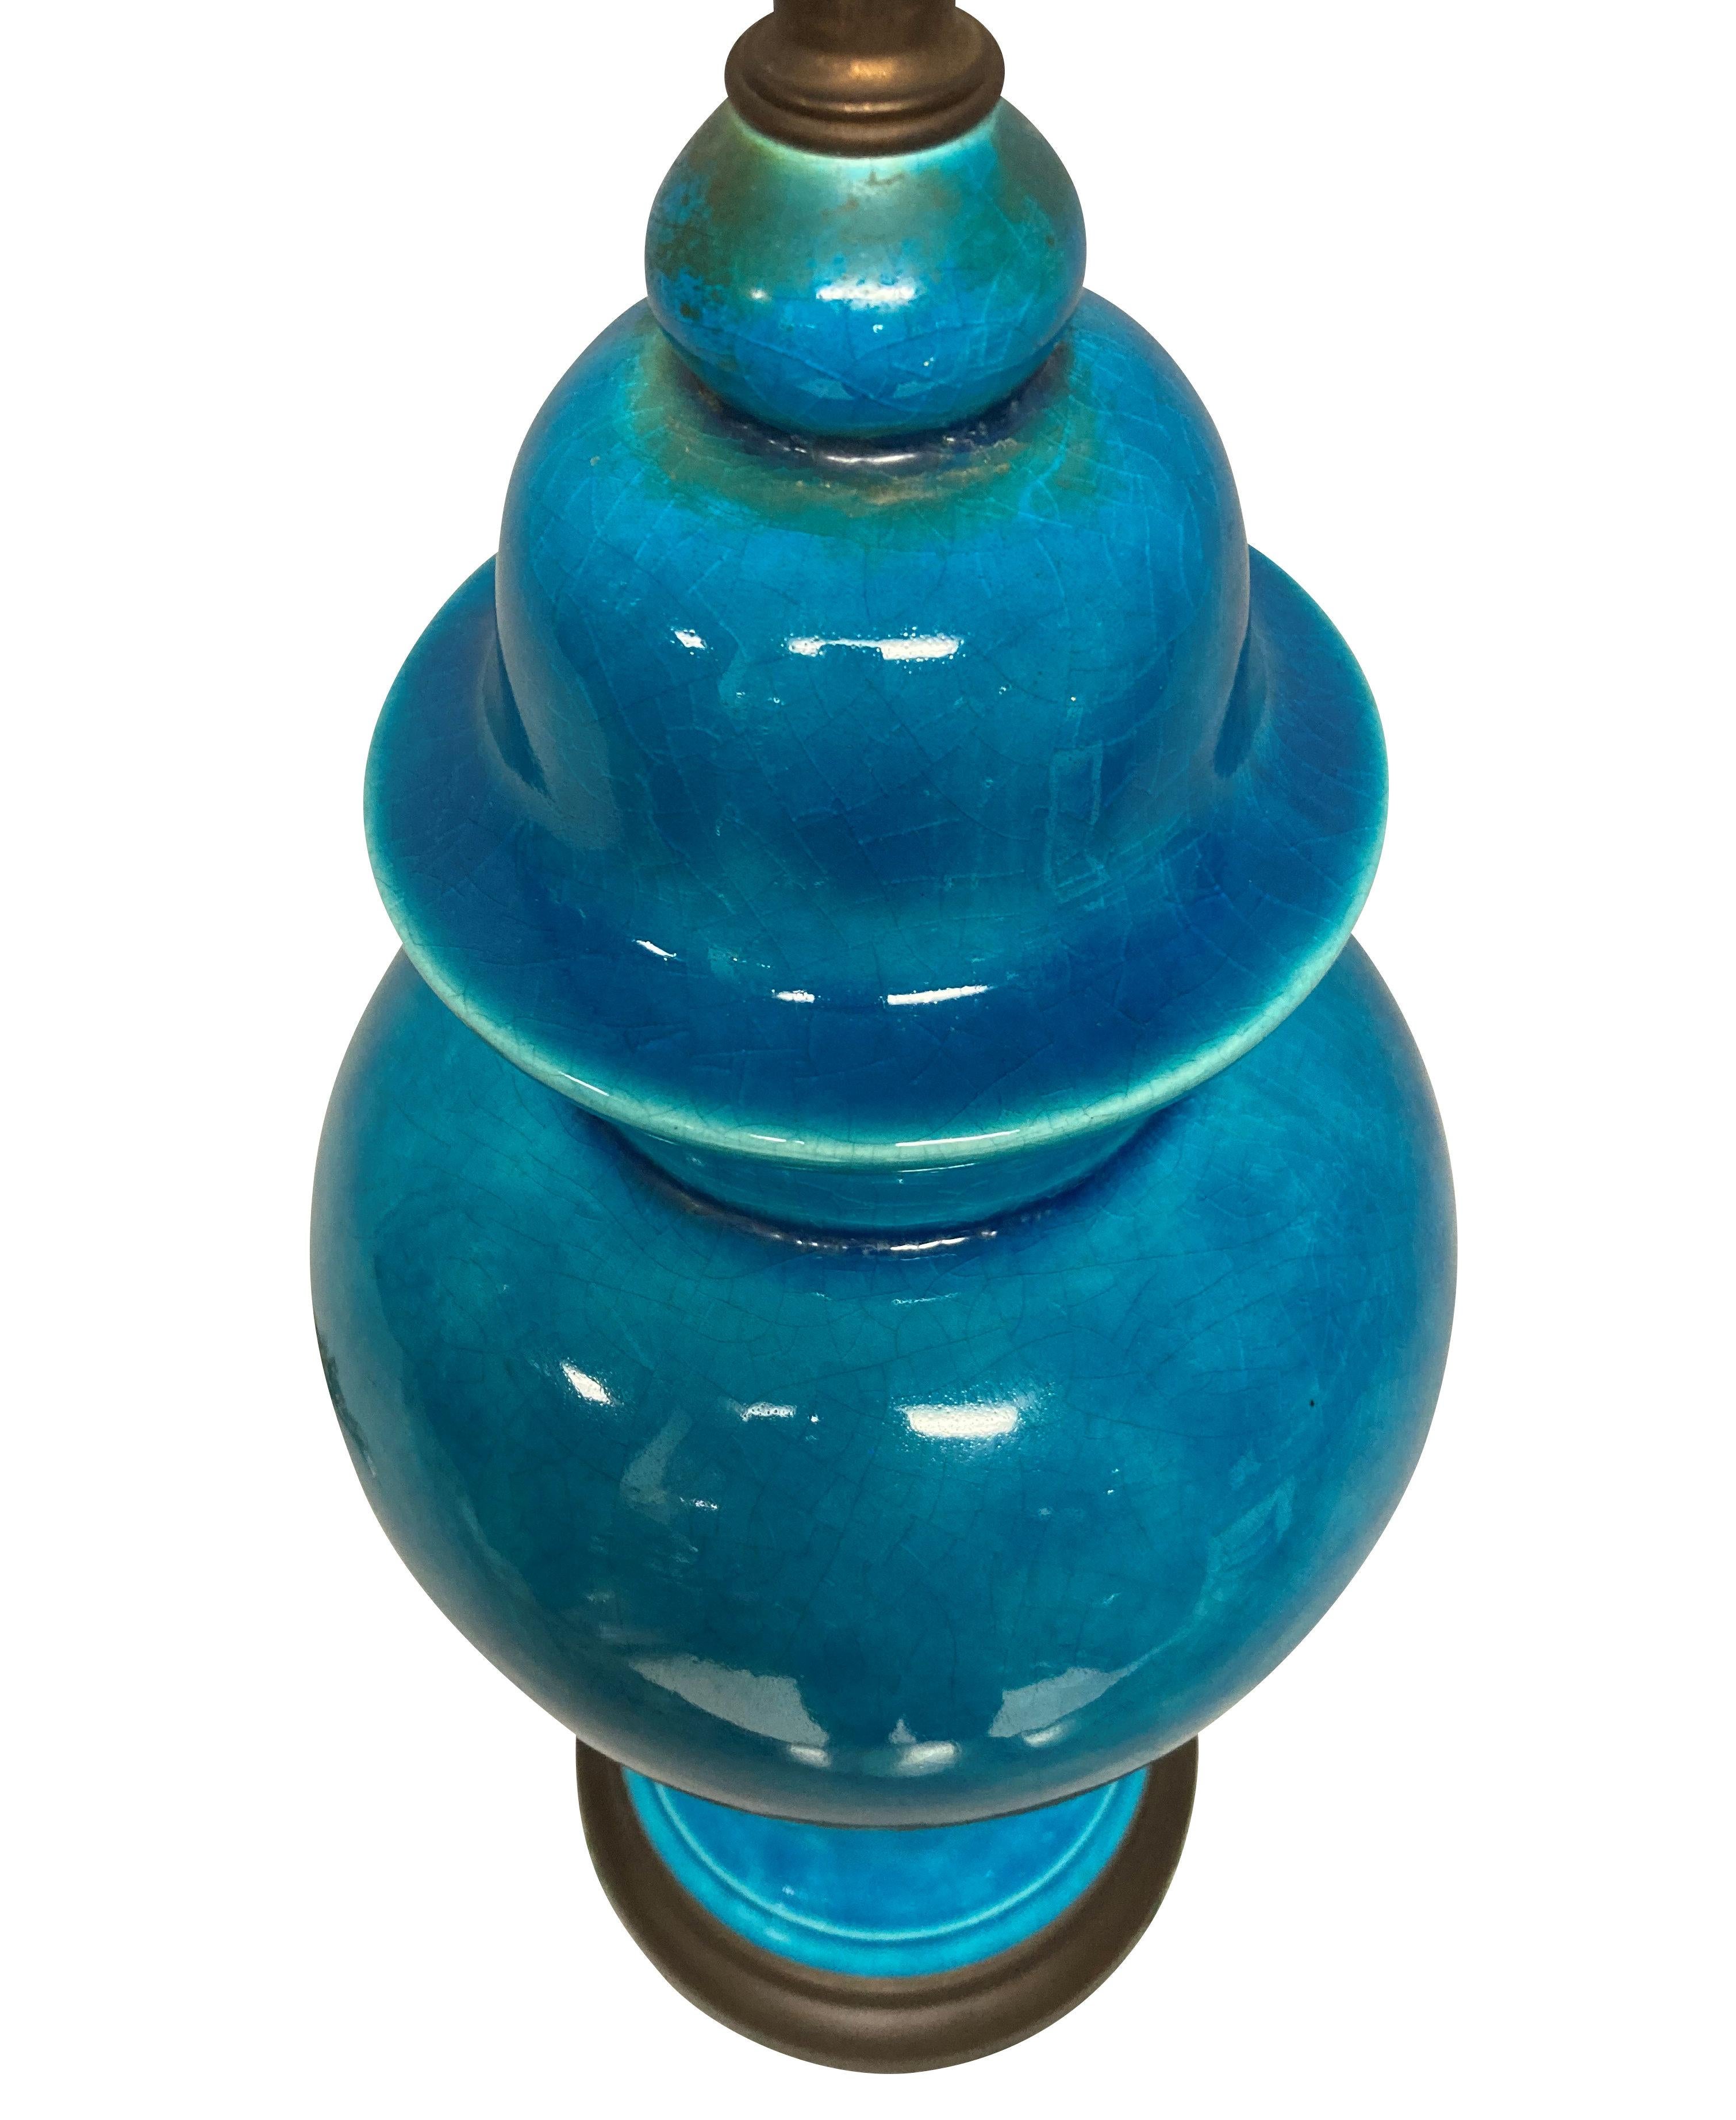 A Chinese, turquoise glazed vase lamp with bronzed fittings.